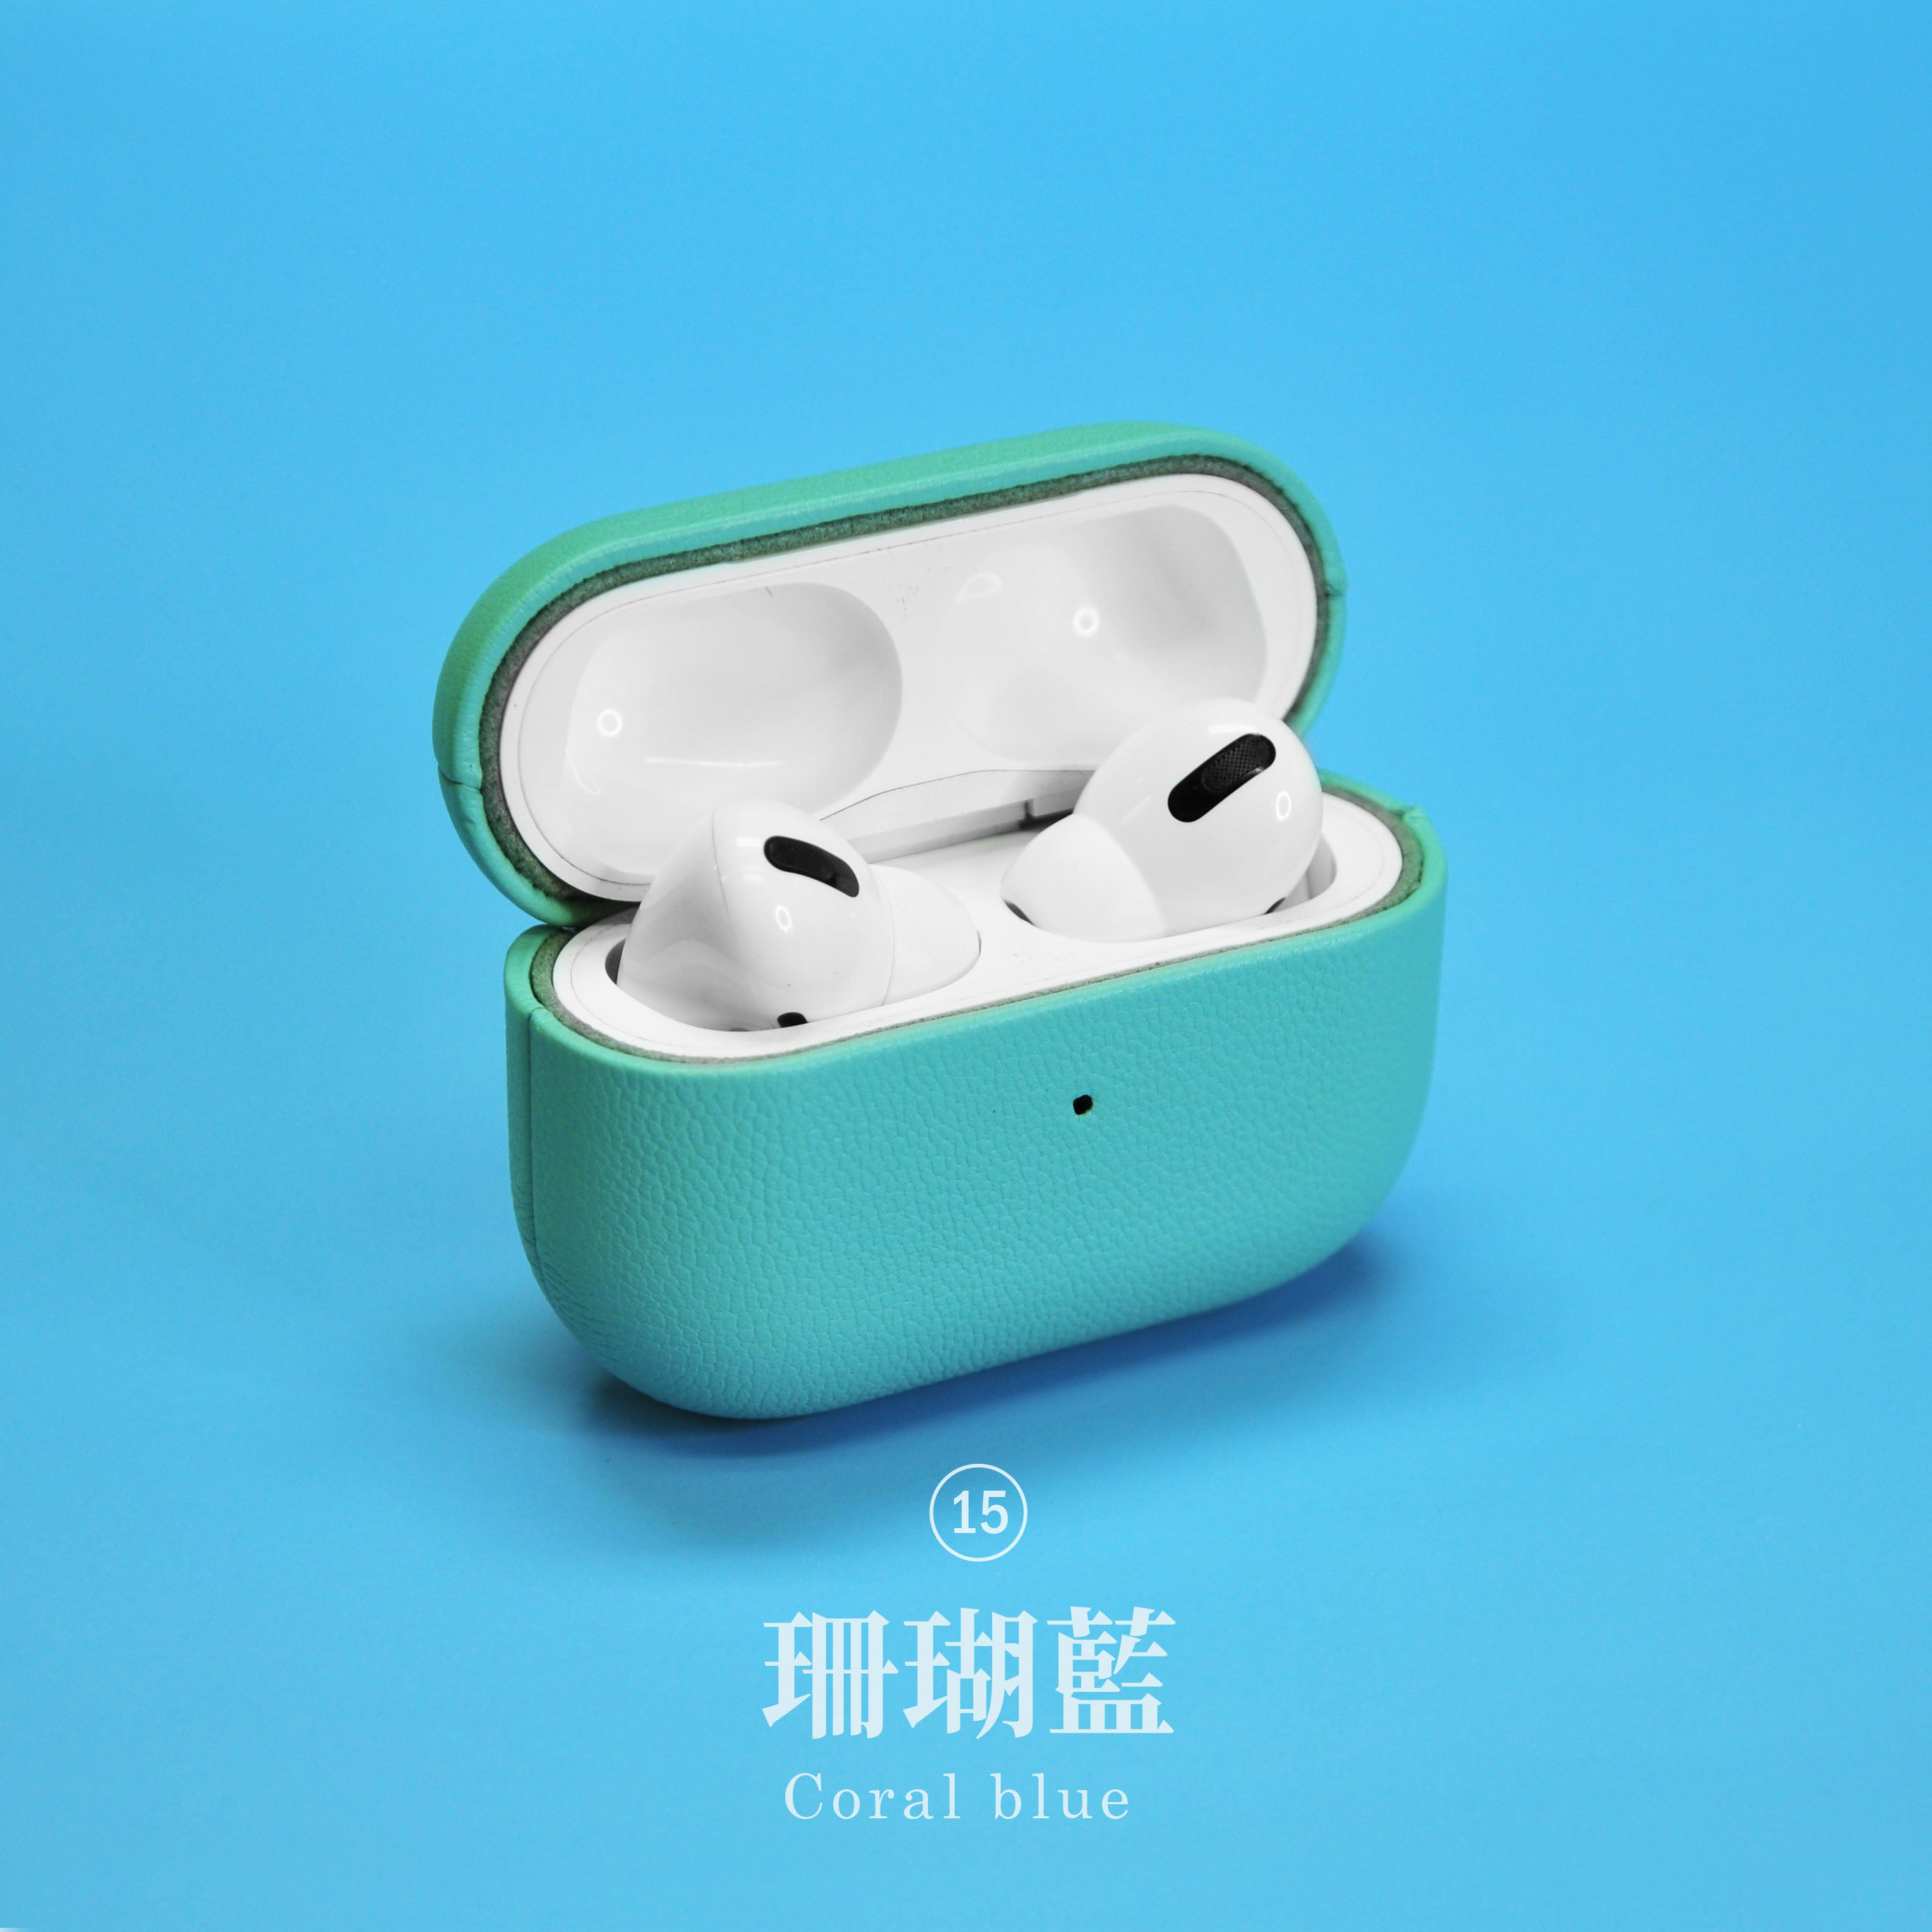 Genuine Leather AirPods Pro Case - Blue Series